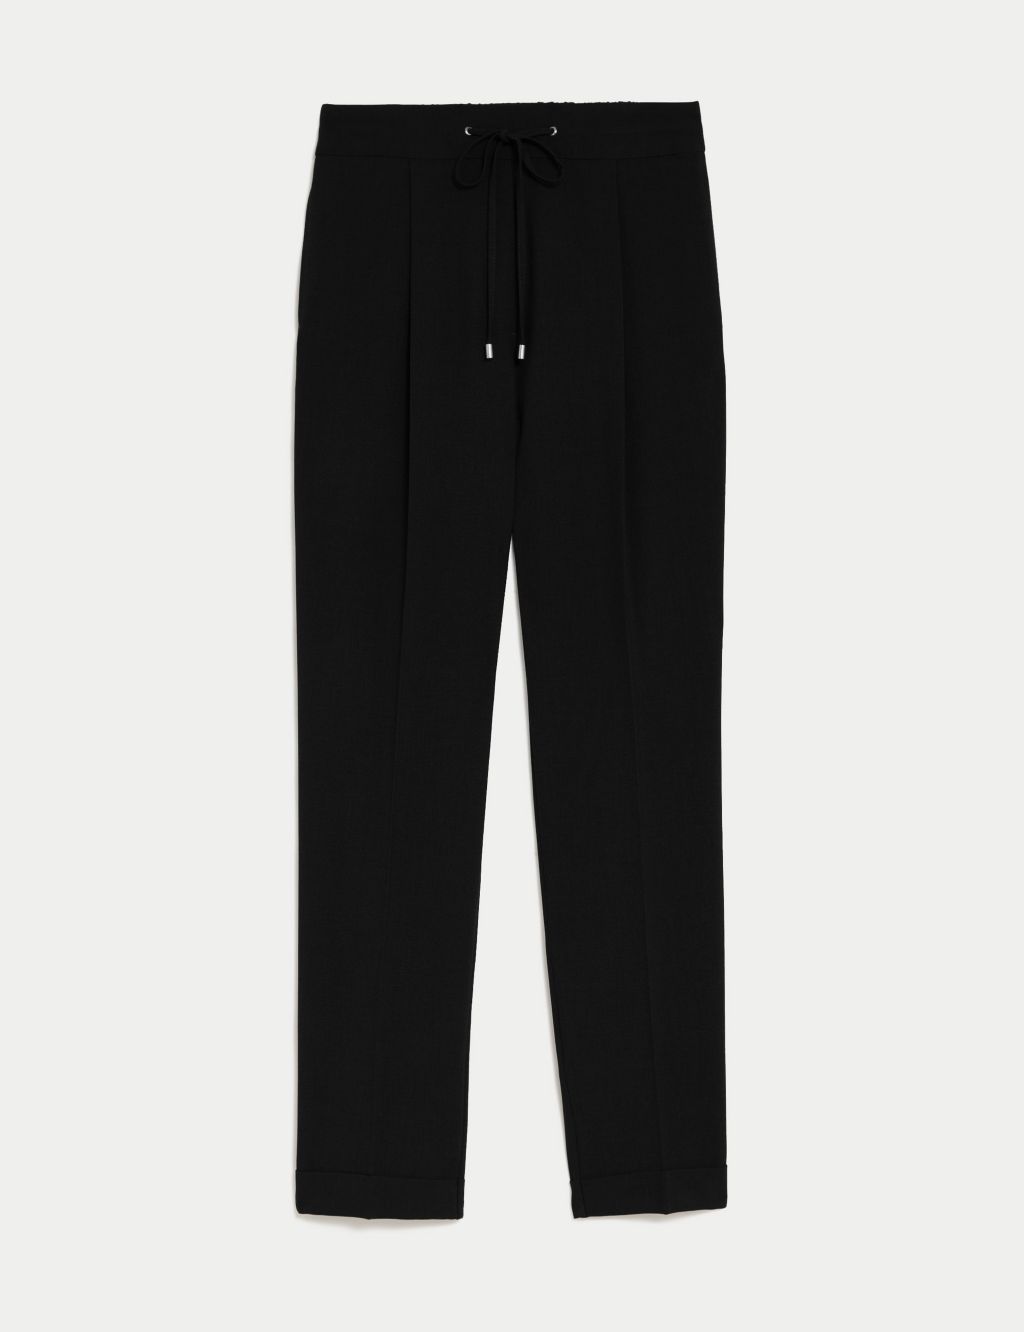 Drawstring Tapered Ankle Grazer Trousers image 2